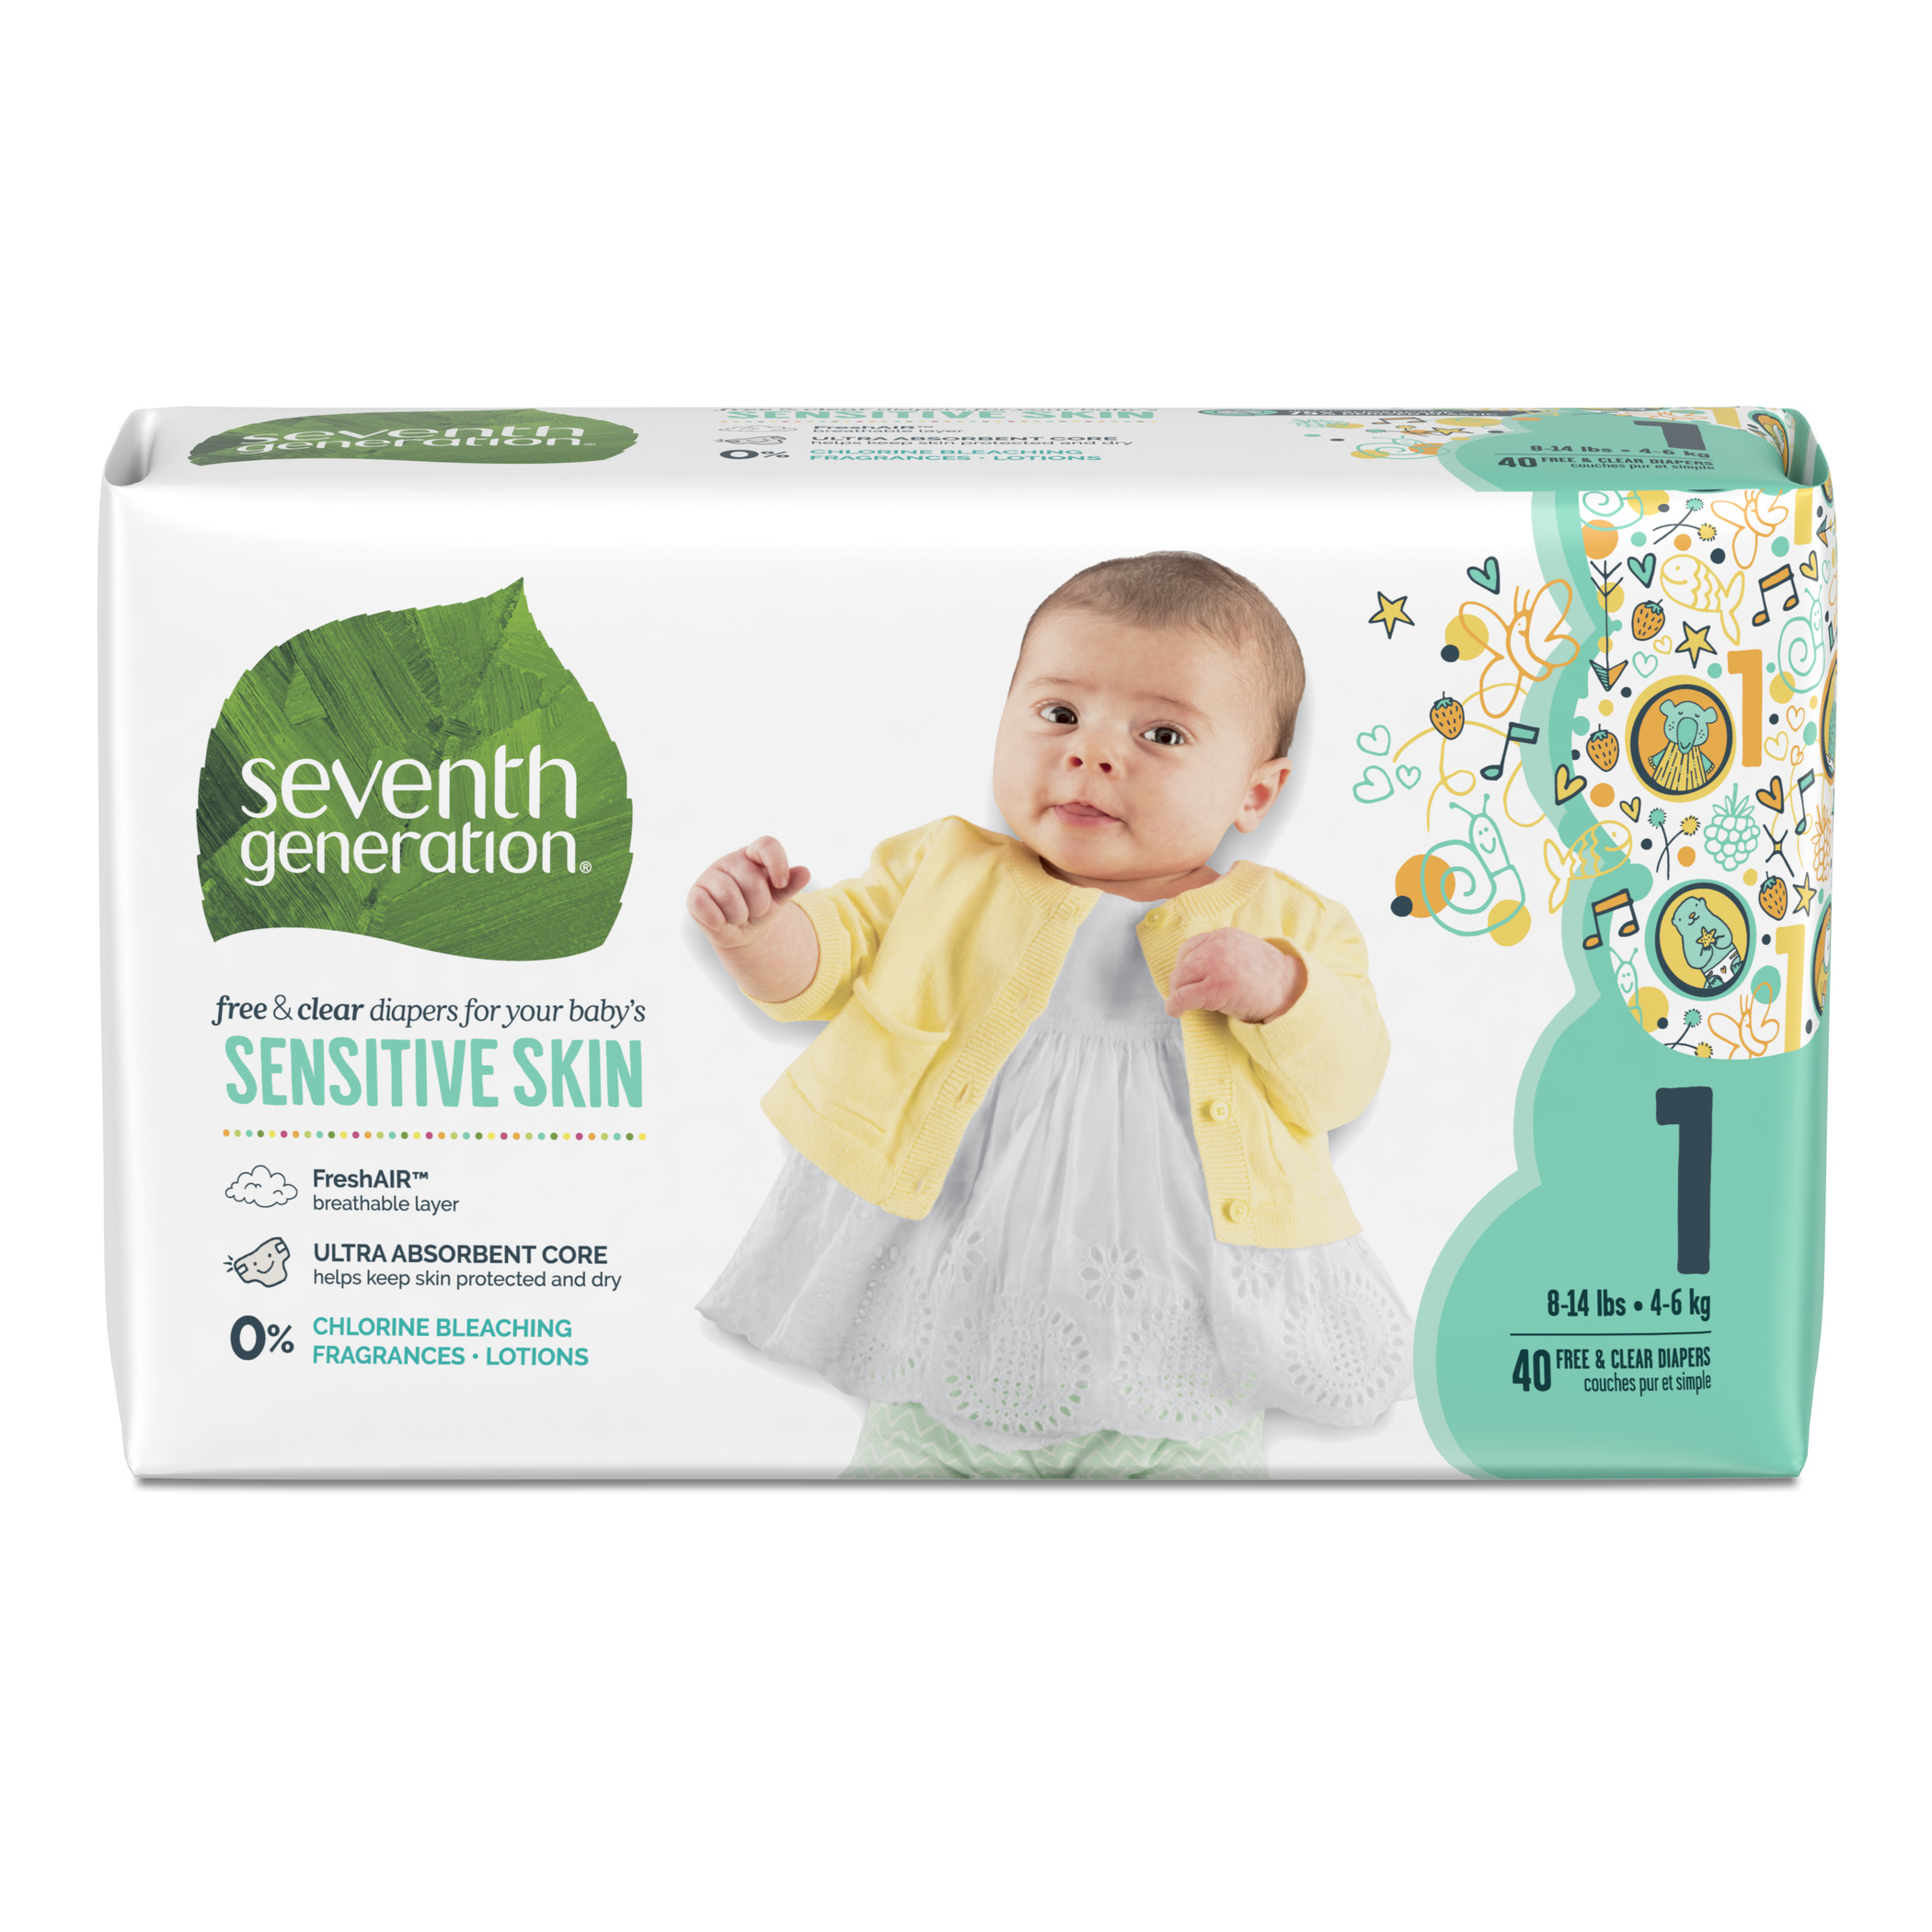 7th generation diapers